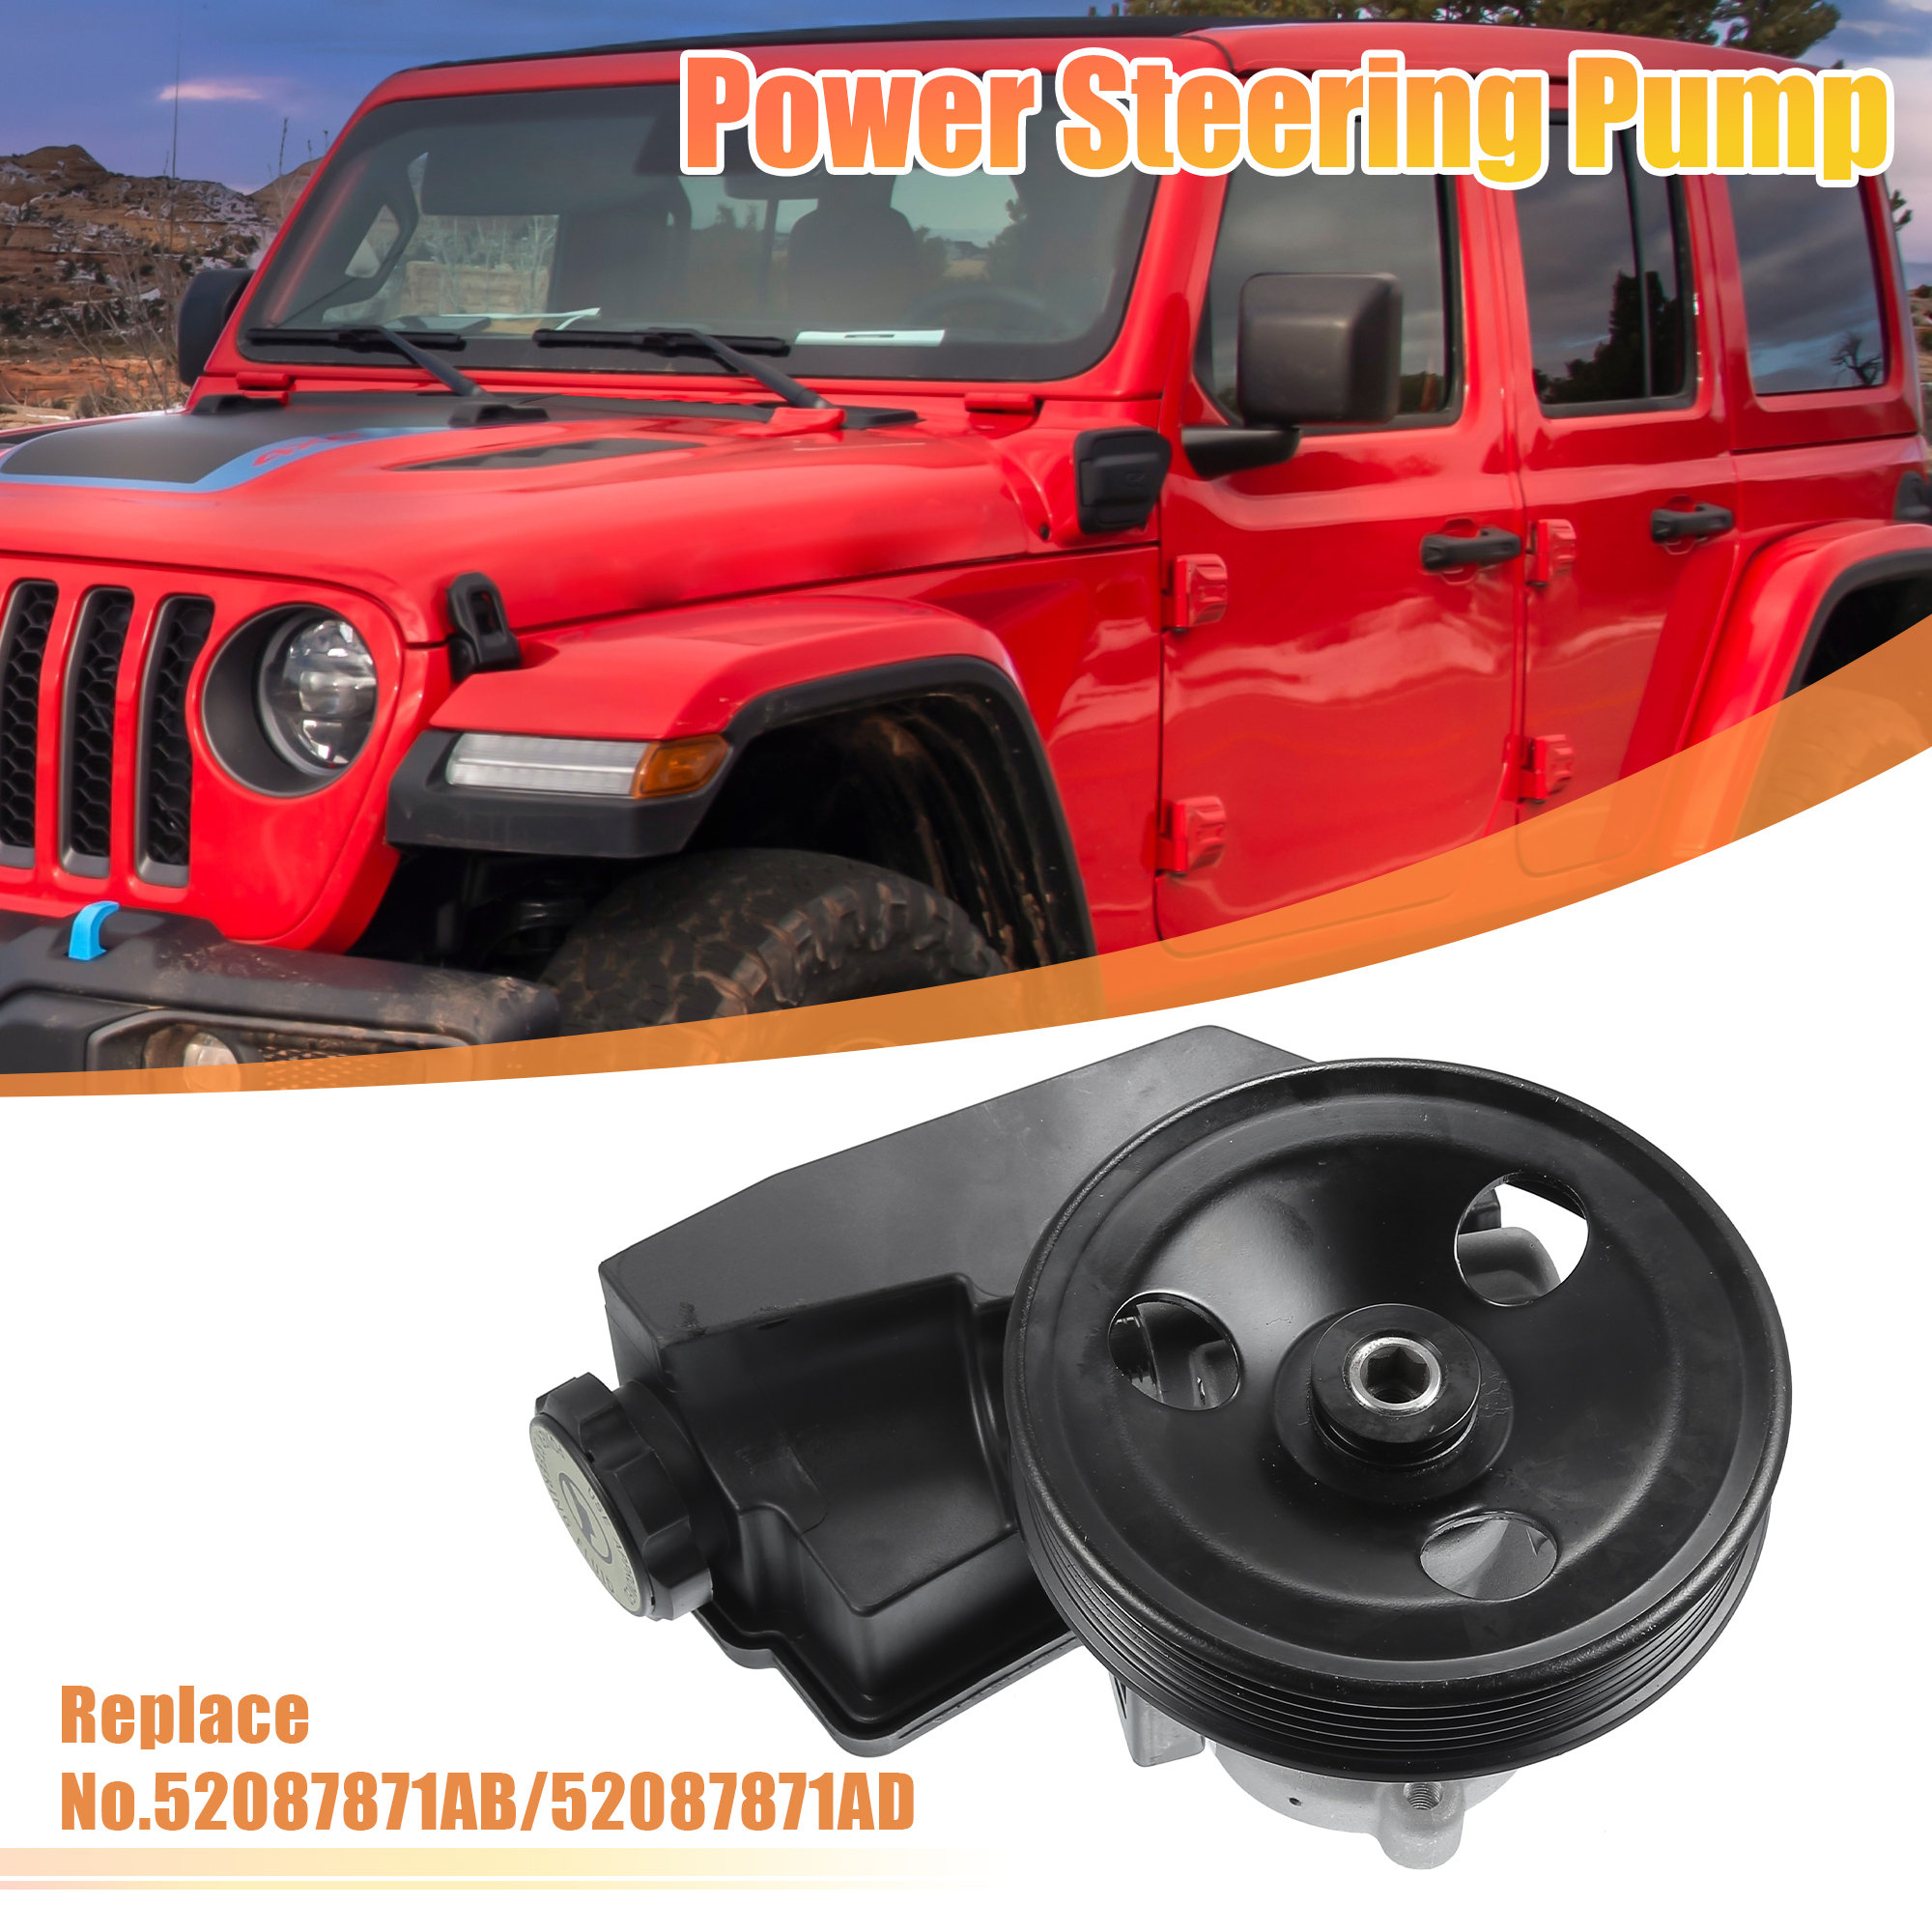 Unique Bargains Power Steering Pump Fit for Jeep Wrangler 1997-2003 No.52087871AB/52087871AD